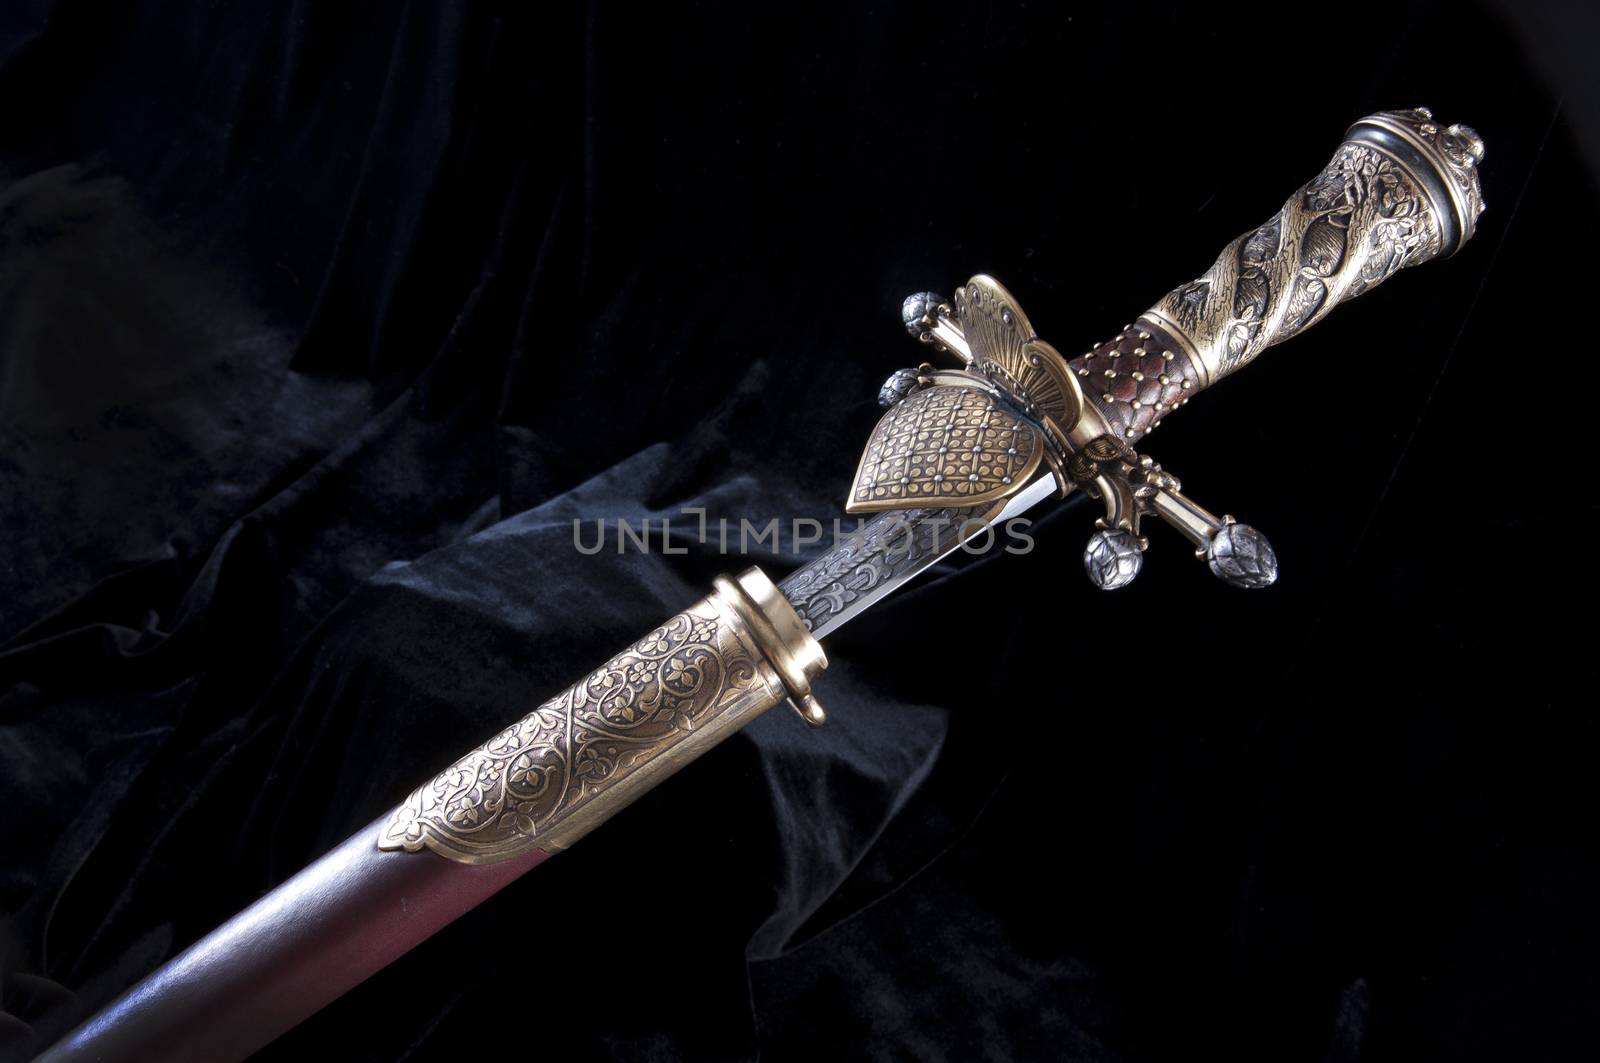 smart dagger of the medieval soldier. It was used for hunting